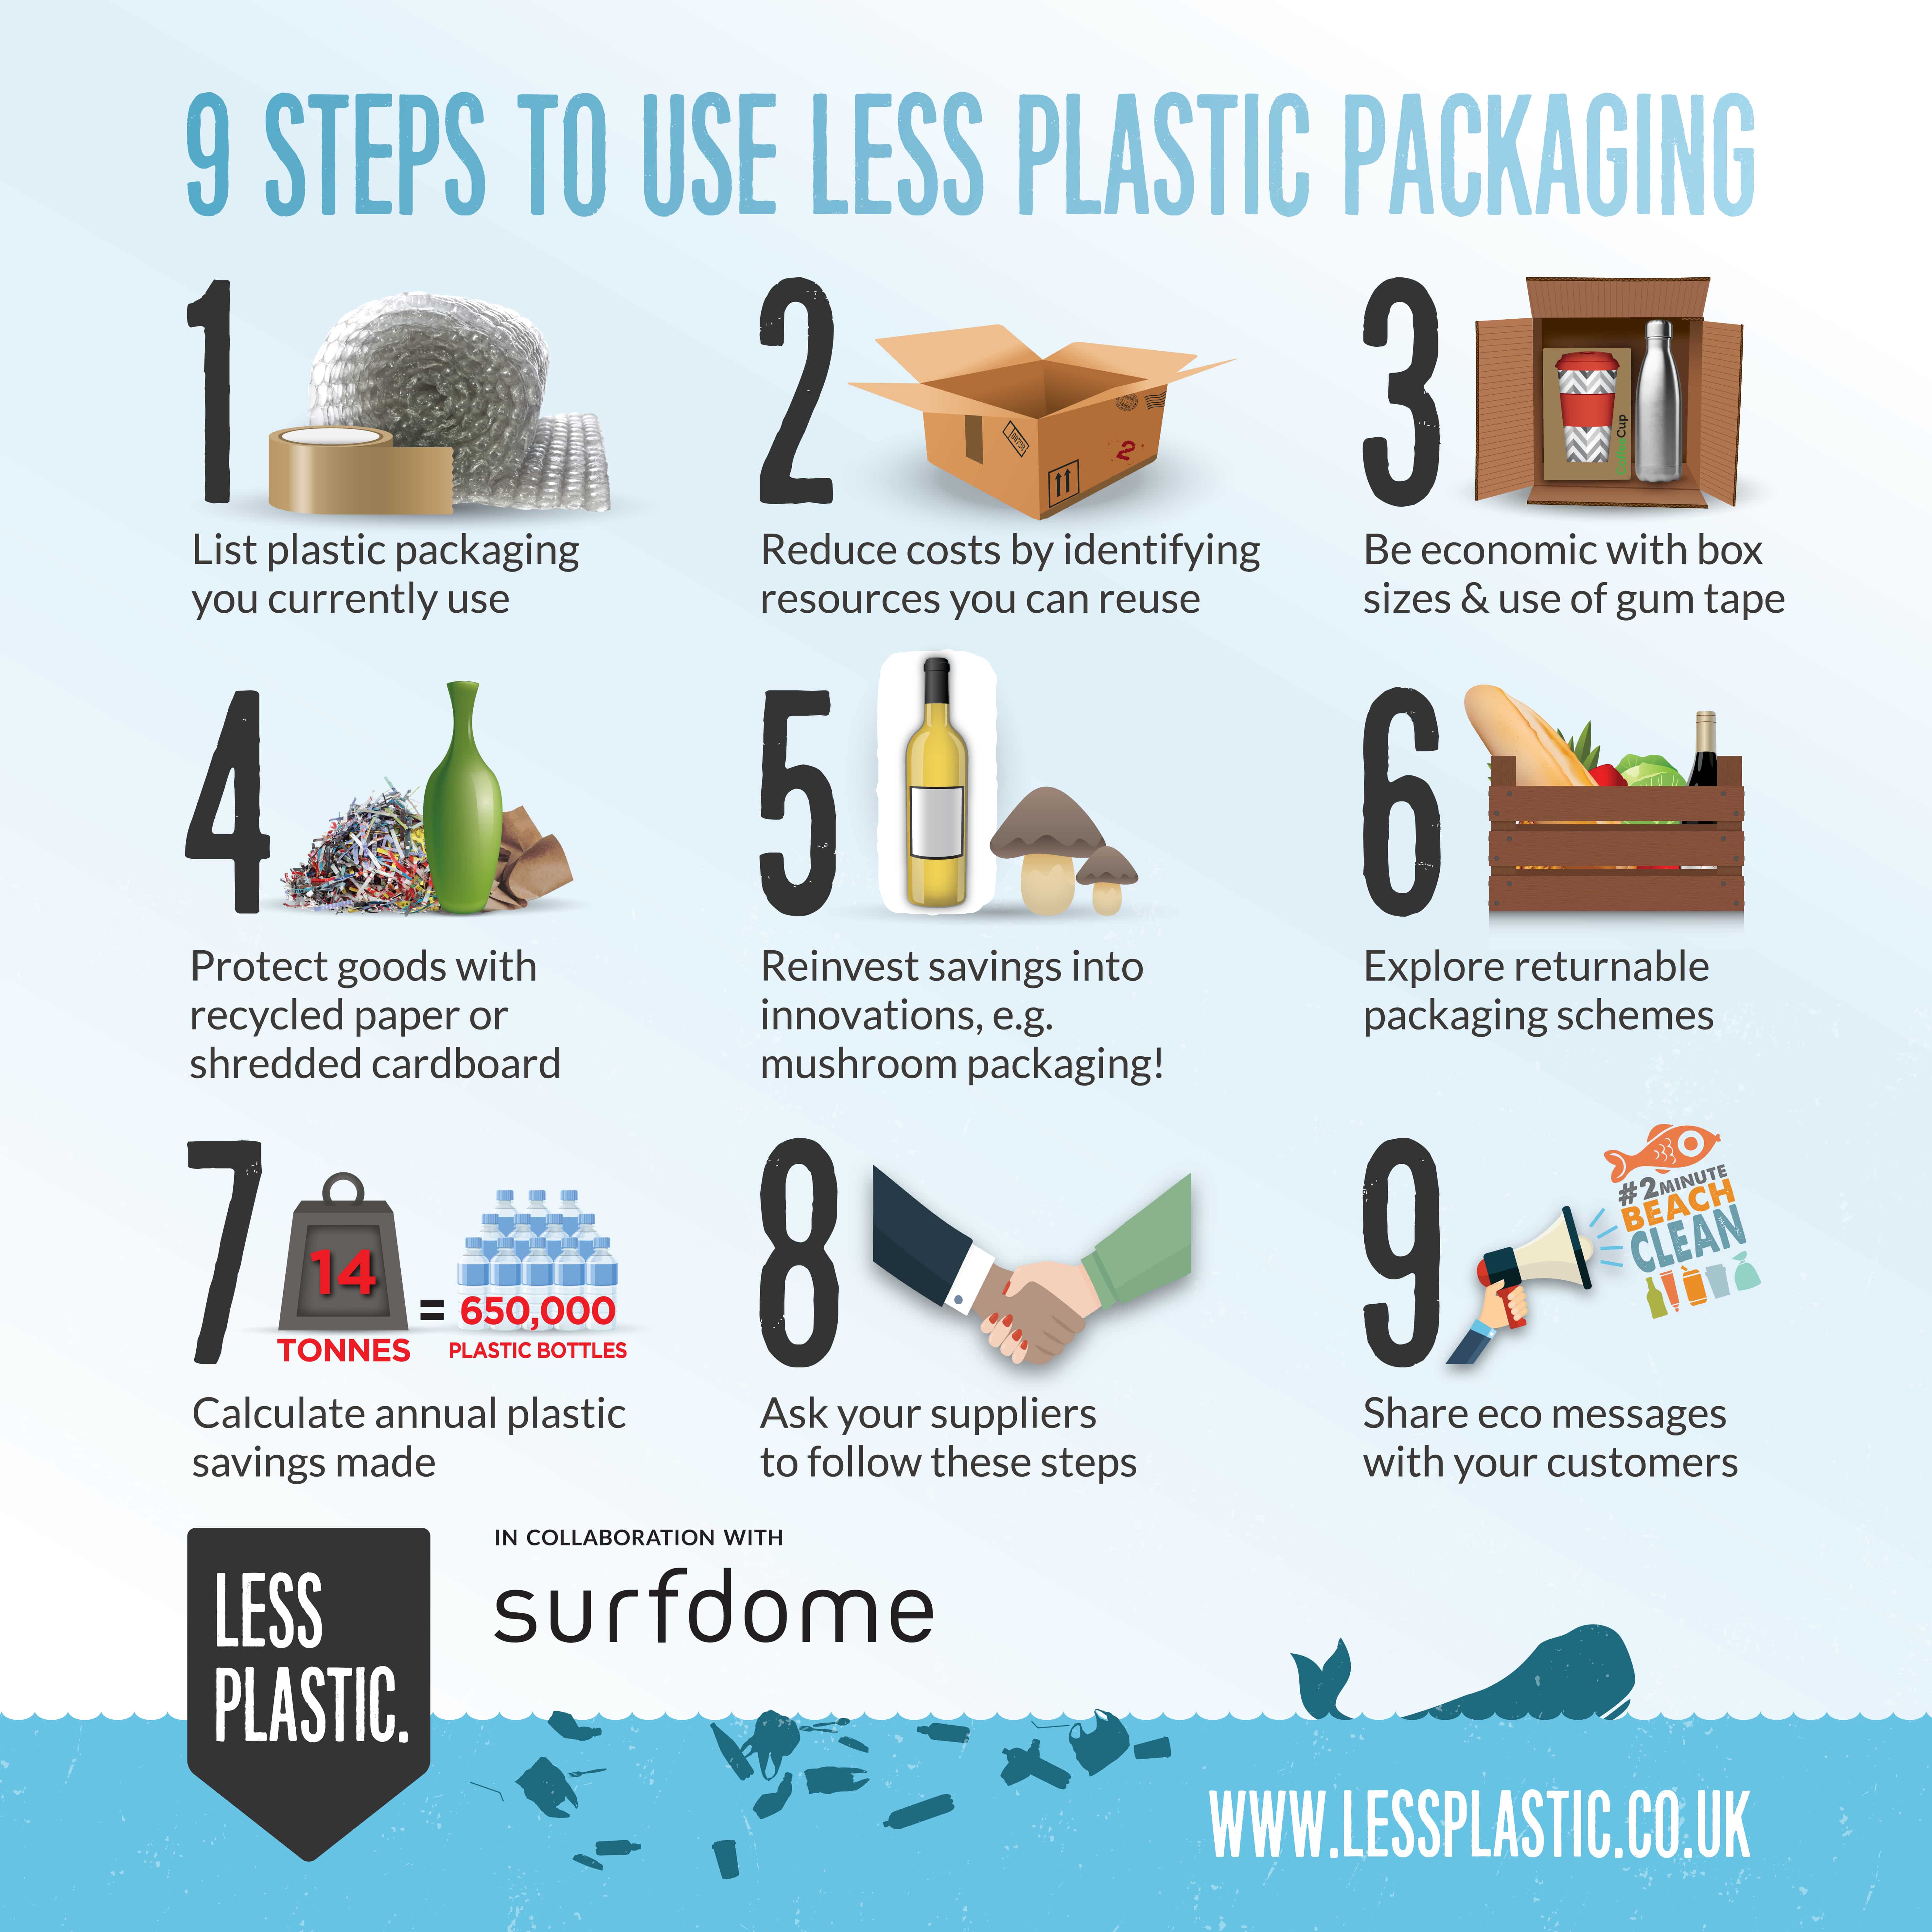 9 steps to use less plastic packaging infographic